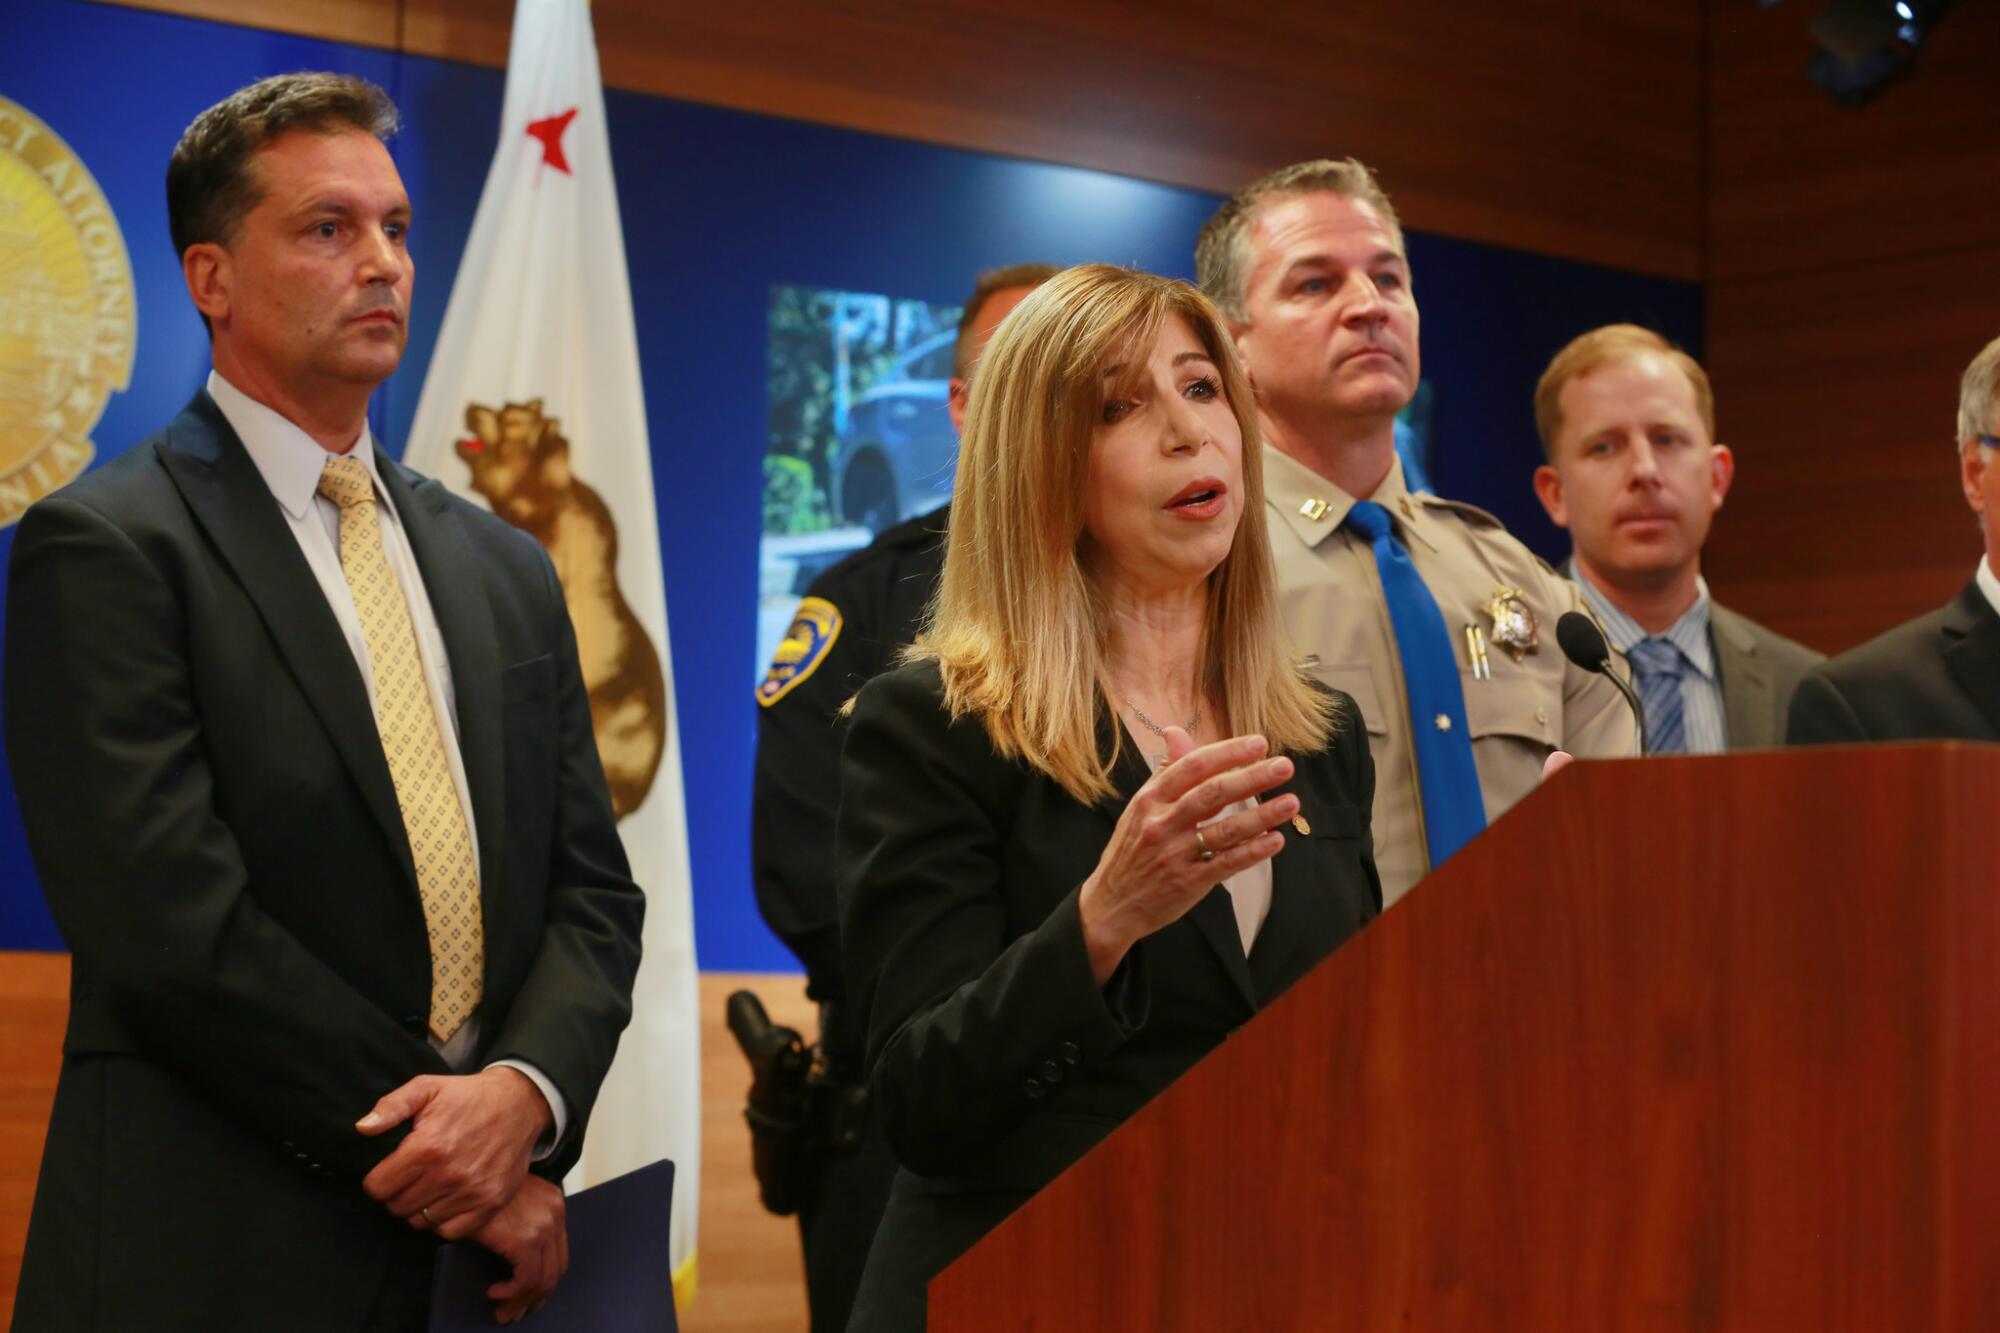 San Diego, CA. USA December 01, 2016 | At the podium Thursday, Deputy District Attorney Summer Stephan introduces the results of an undercover investigation in which detectives bought stolen vehicles, drugs and weapons. At left is Special Agent-in-Charge John D'Angelo of Alcohol, Tobacco and Firearms, and to the immediate right of Stephan is California Highway Patrol Captain Don Goodbrand, the RATT Commander. The Regional Auto Theft Team (RATT), in cooperation with the La Mesa Police Department, San Diego County Sheriff's Department, the California Highway Patrol and the Bureau of Alcohol, Tobacco and FIrearms, conducted a 10-month undercover operation that resulted in 42 grand jury indictments. The defendants face various felony charges including vehicle theft, identity theft, illegal weapons possession and illegal drug possession and sales. Operation Kwik Boost was launched in January of this year and netted 117 stolen cars valued at $1.3 million, 51 firearms, five and a half pounds of methamphetamine, three kilos of cocaine and 15 pounds of marijuana. | Mandatory photo credit: Peggy Peattie / San Diego Union-Tribune